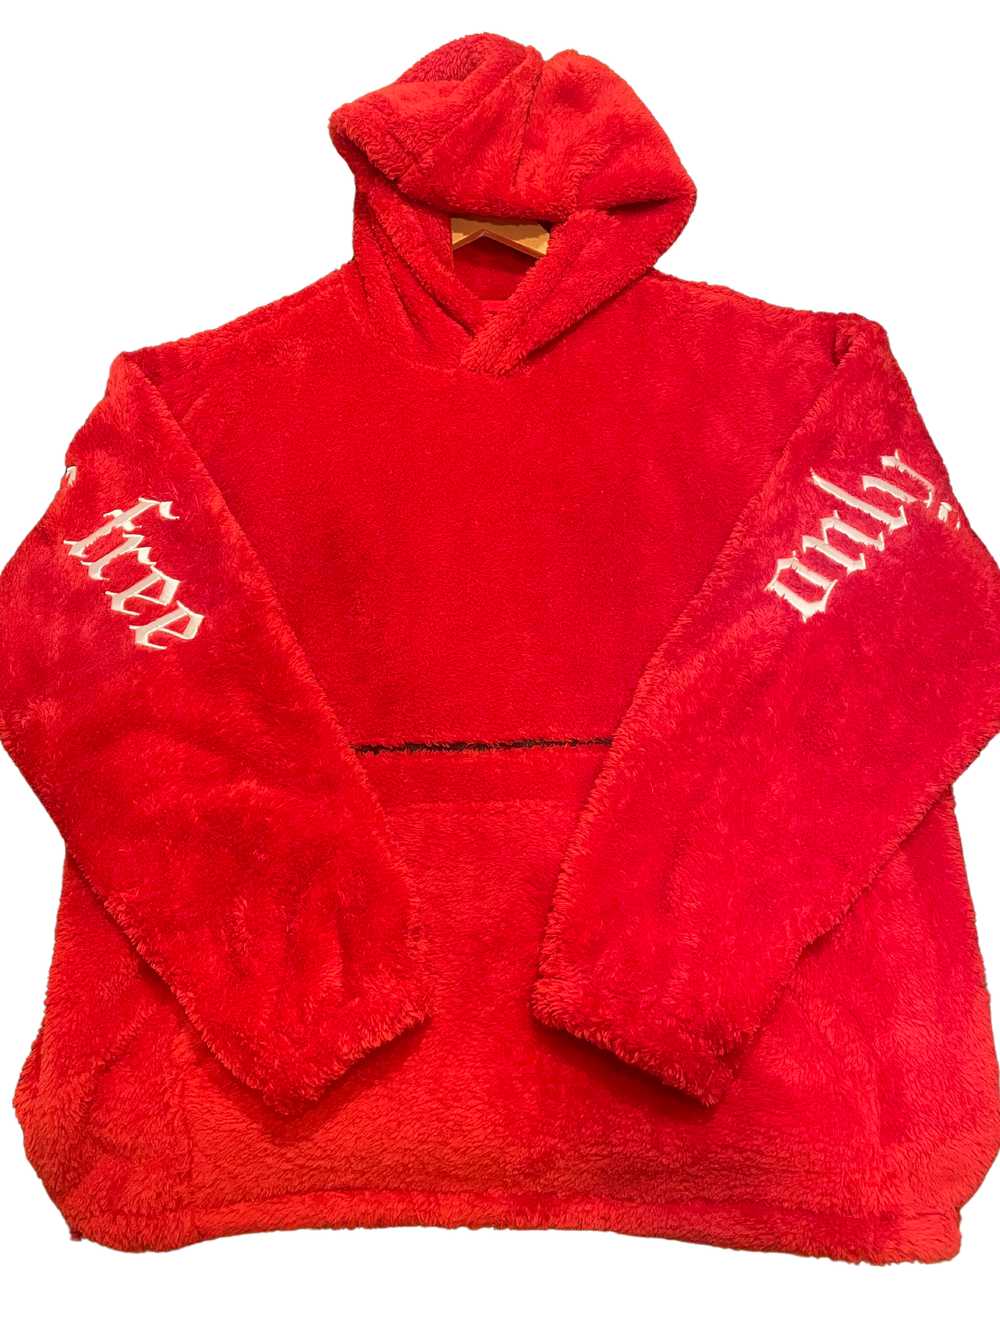 ASRV 0553. Sherpa Recovery Hoodie - image 1